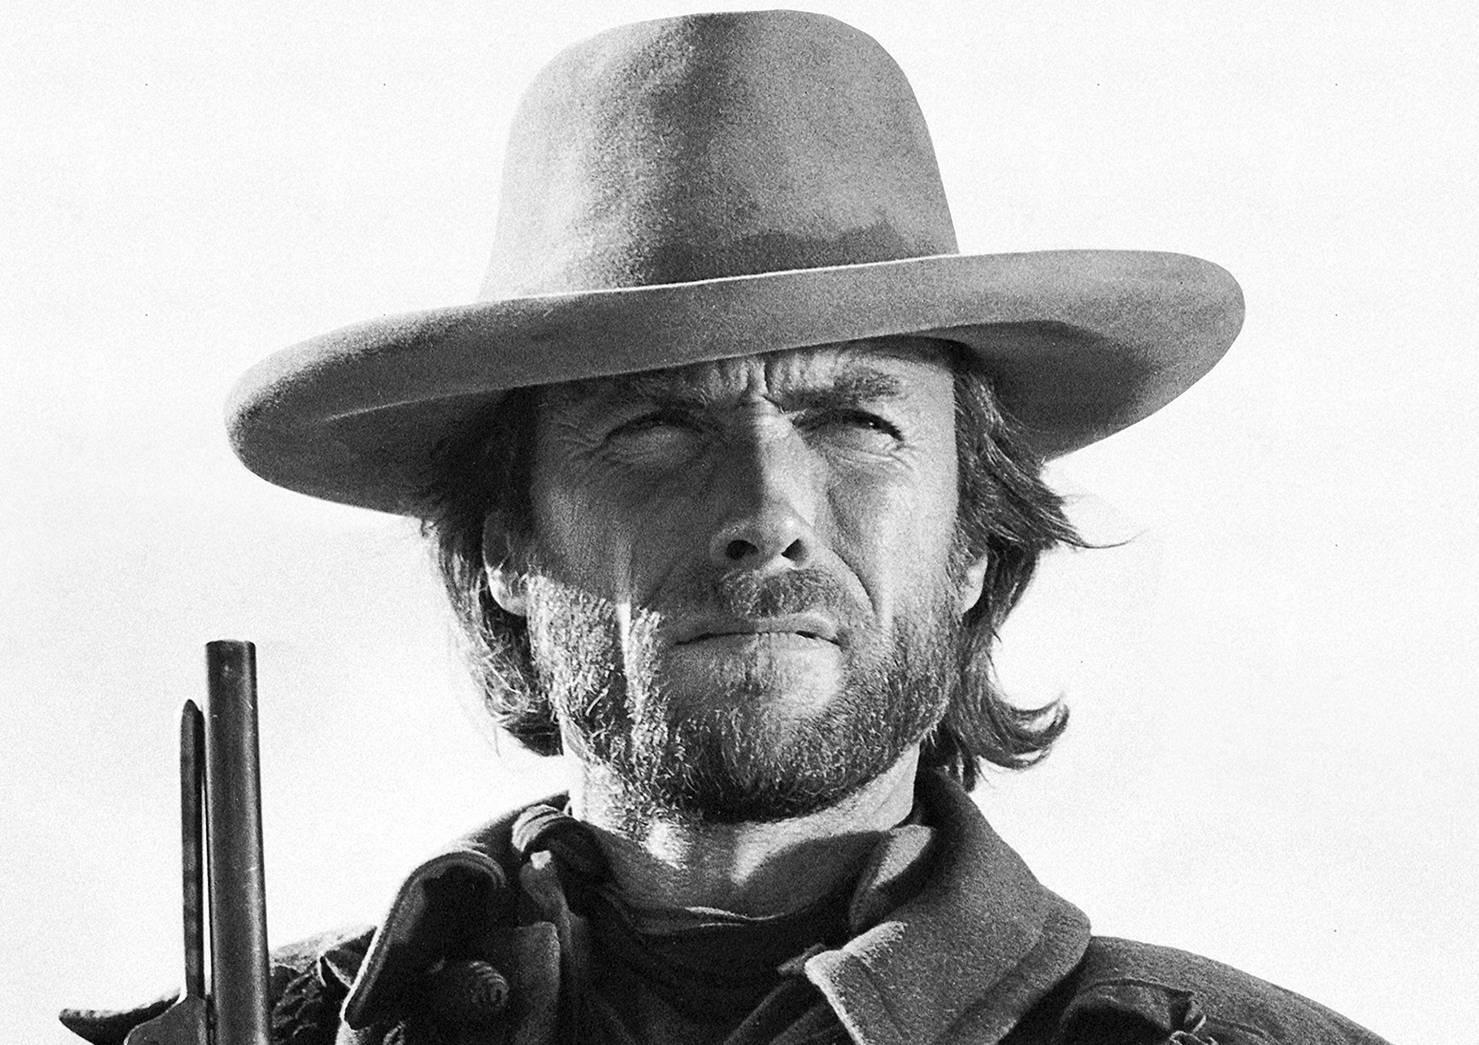 Clint Eastwood (from the film Outlaw Josie Wales) - Photograph by Peter Sorel